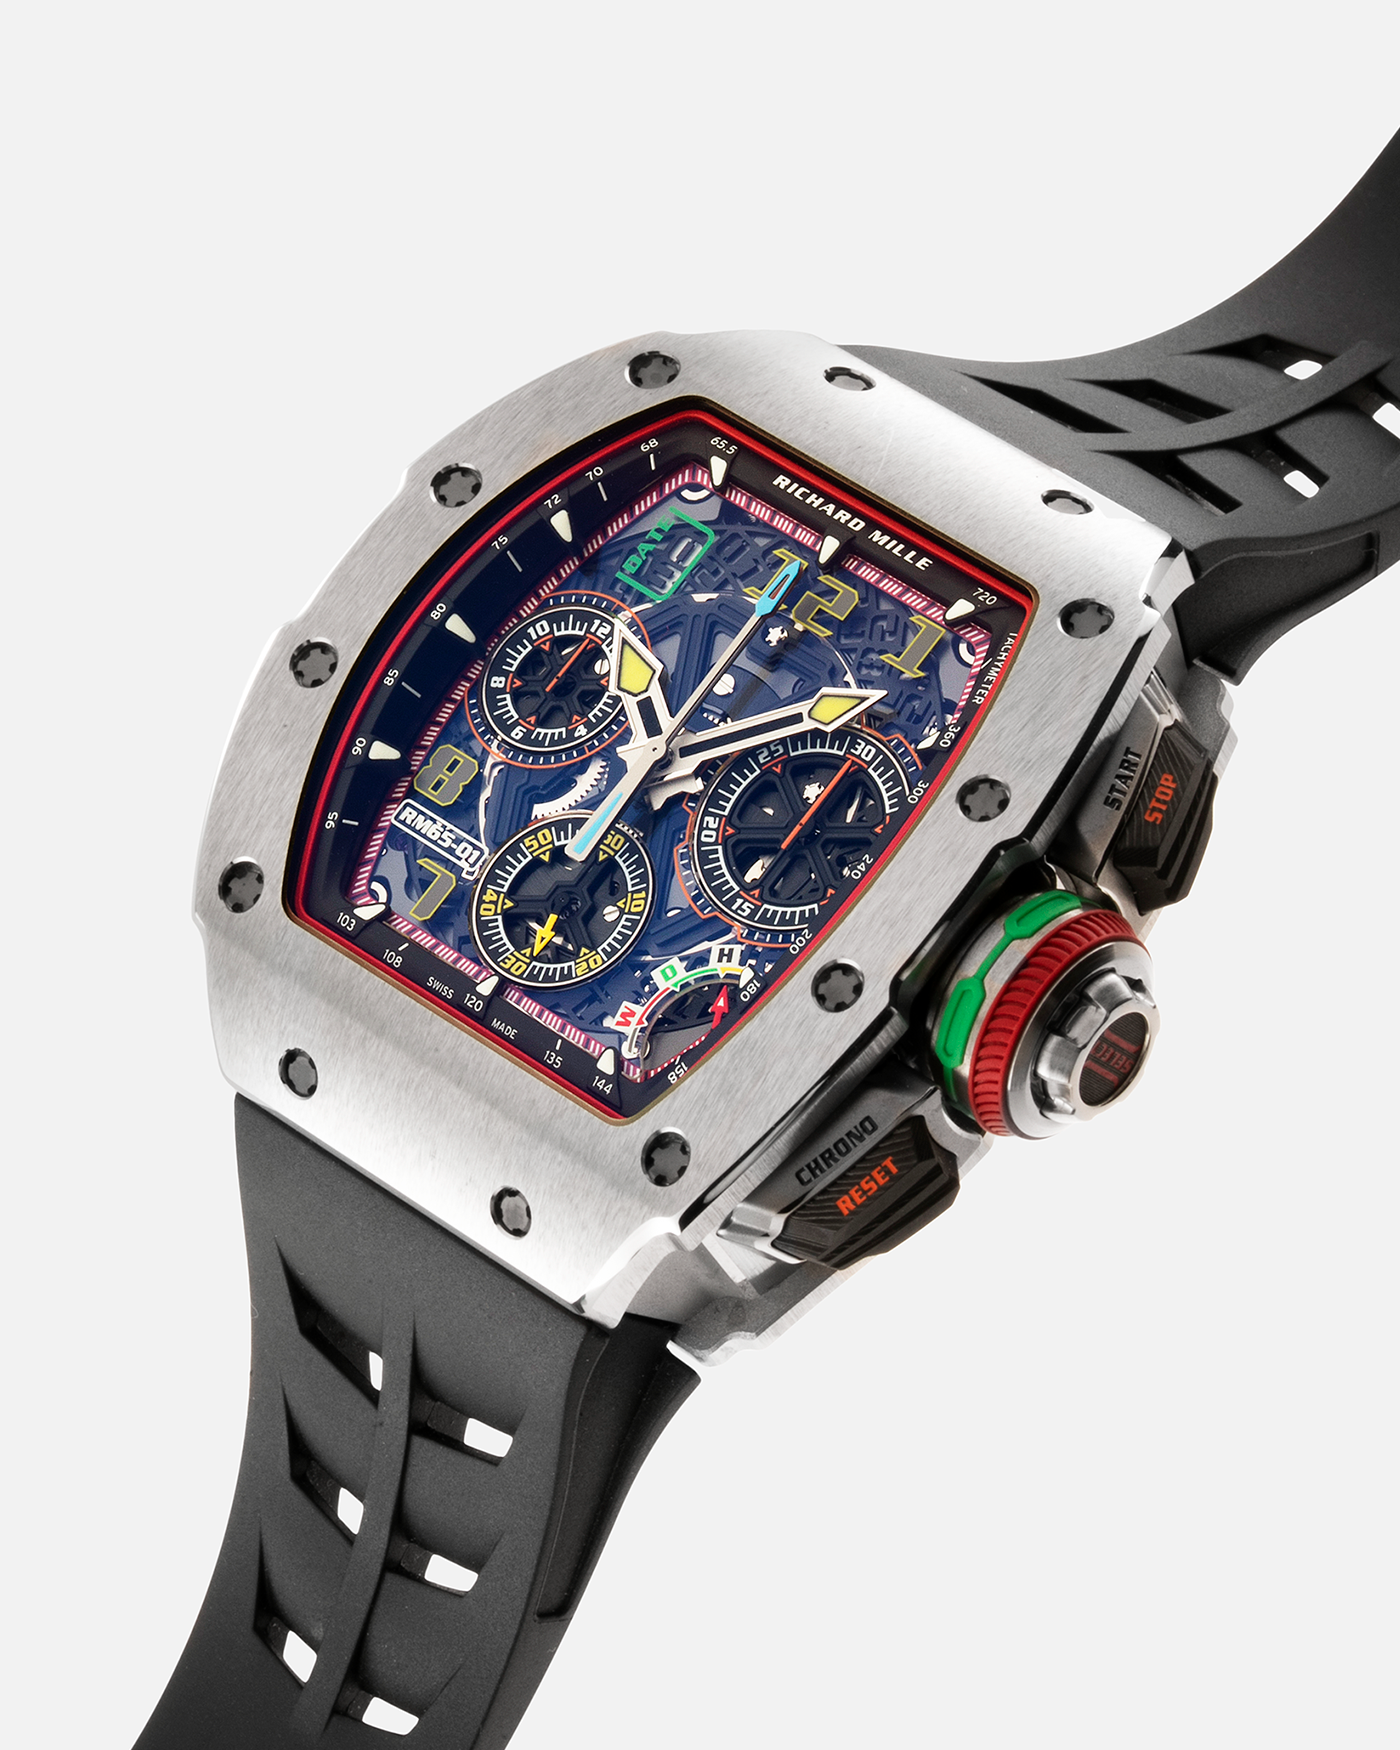 Brand: Richard Mille Year: 2022 Model: RM65-01 Material: Titanium Movement: Cal. RMAC4 Case Diameter: 44mm X 49.9mm Bracelet: Richard Mille Black Rubber Strap with Titanium Deployant Clasp and Additional Richard Mille Green Rubber Strap